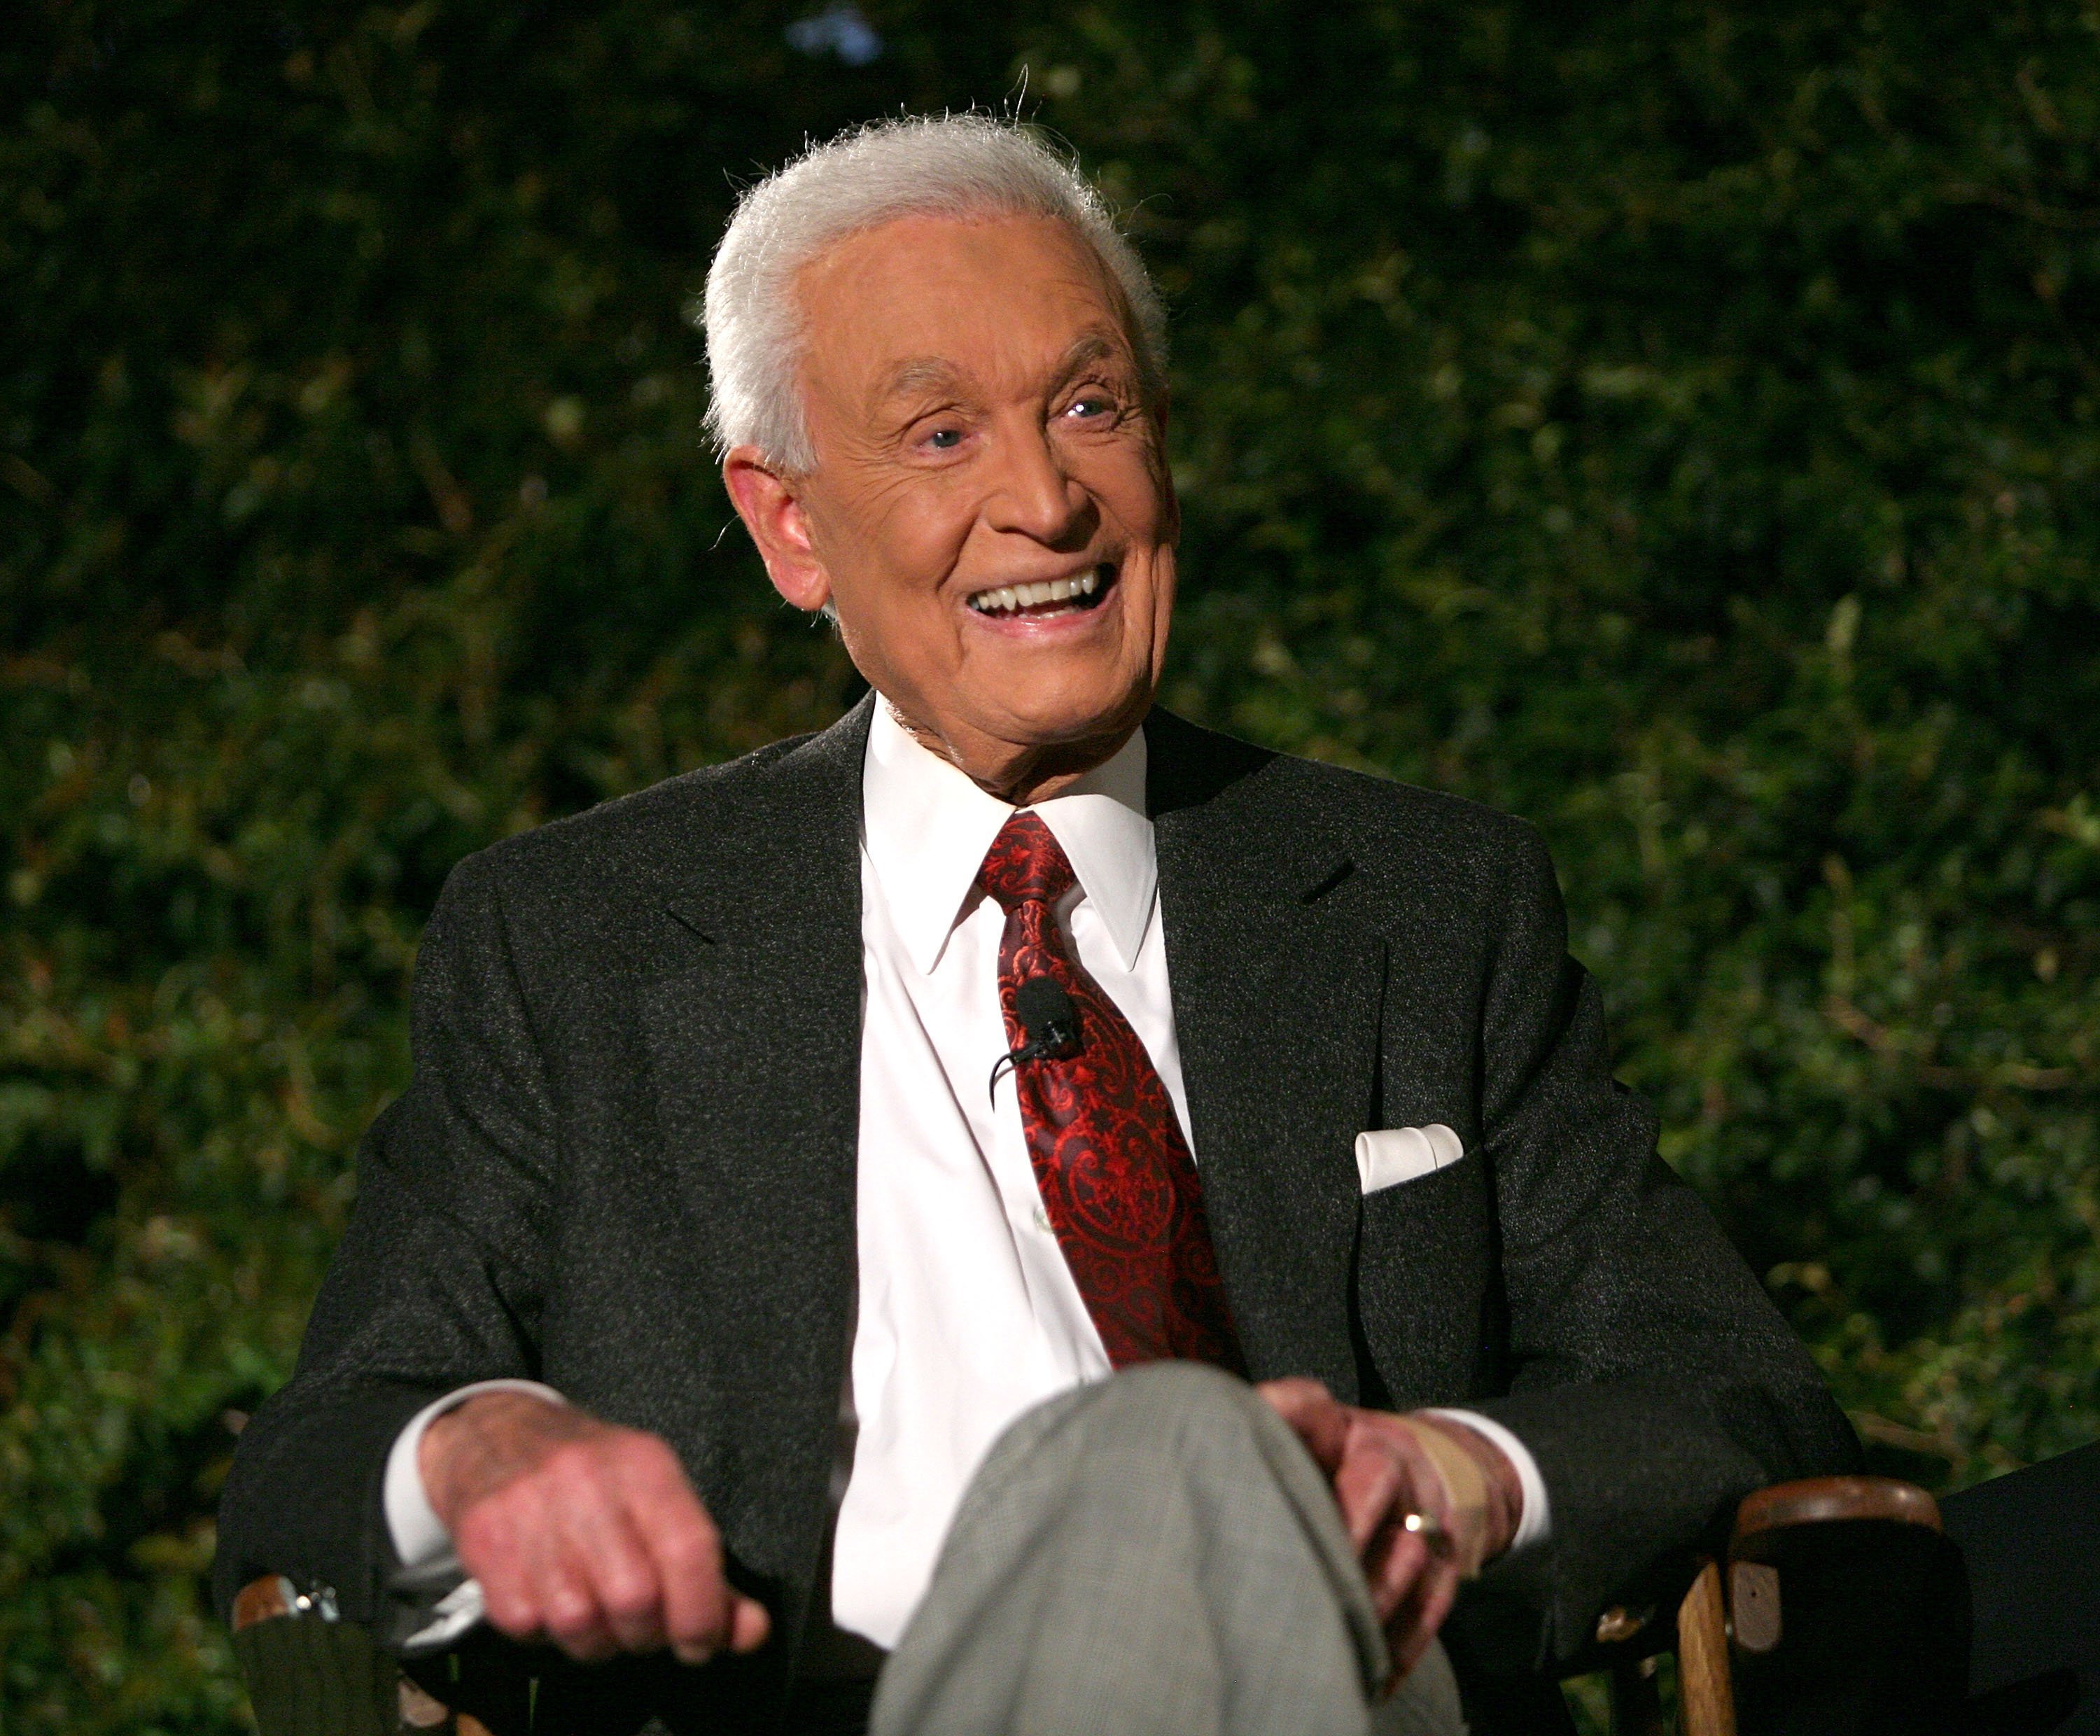 Bob Barker attends An Evening With Bob Barker at The Leonard Goldenson Theater May 7, 2007 | Photo: GettyImages